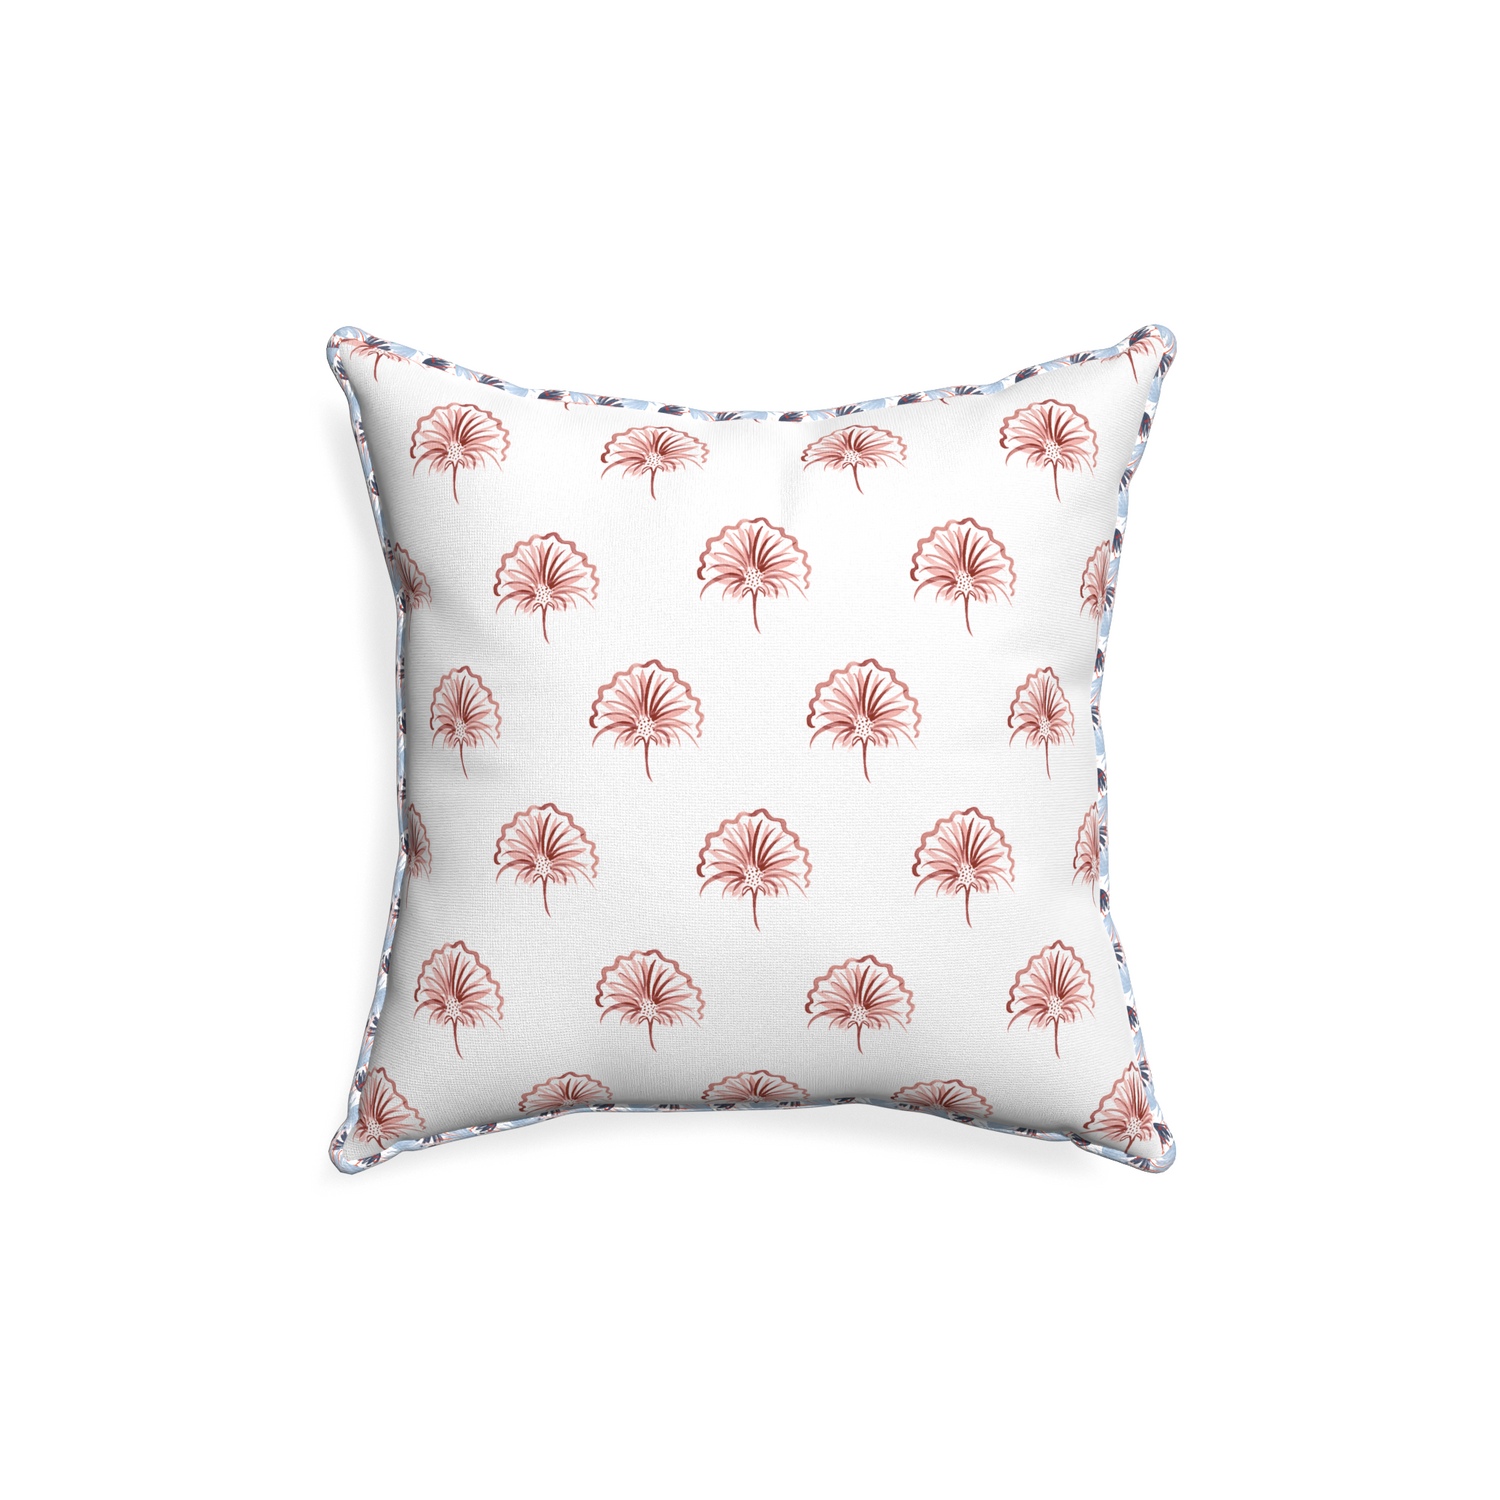 18-square penelope rose custom floral pinkpillow with e piping on white background